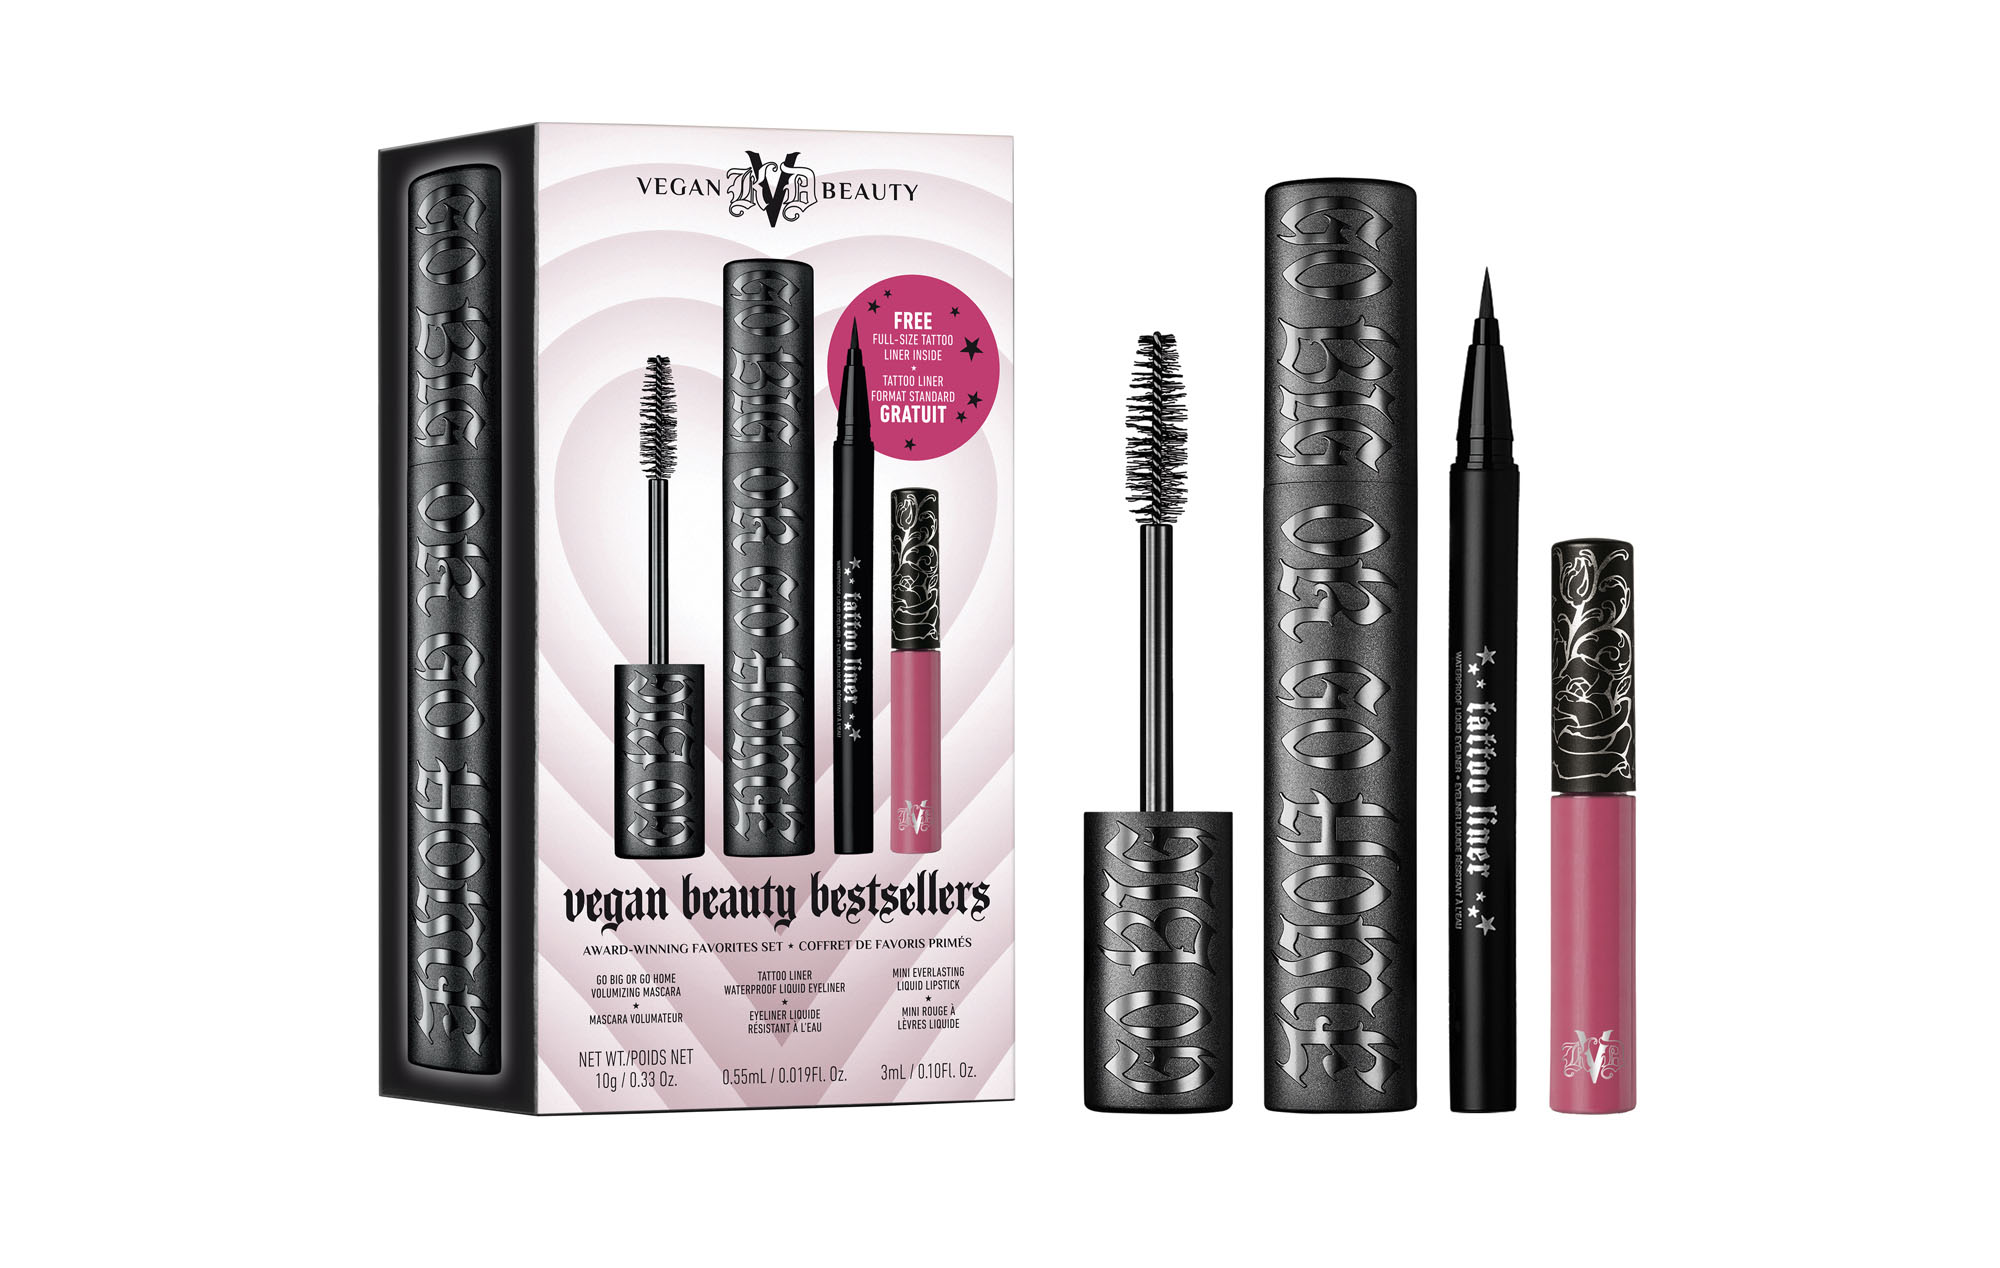 KVD Beauty Vegan Bestsellers Kit, Available online and in store at Ulta Beauty, Aug 30.